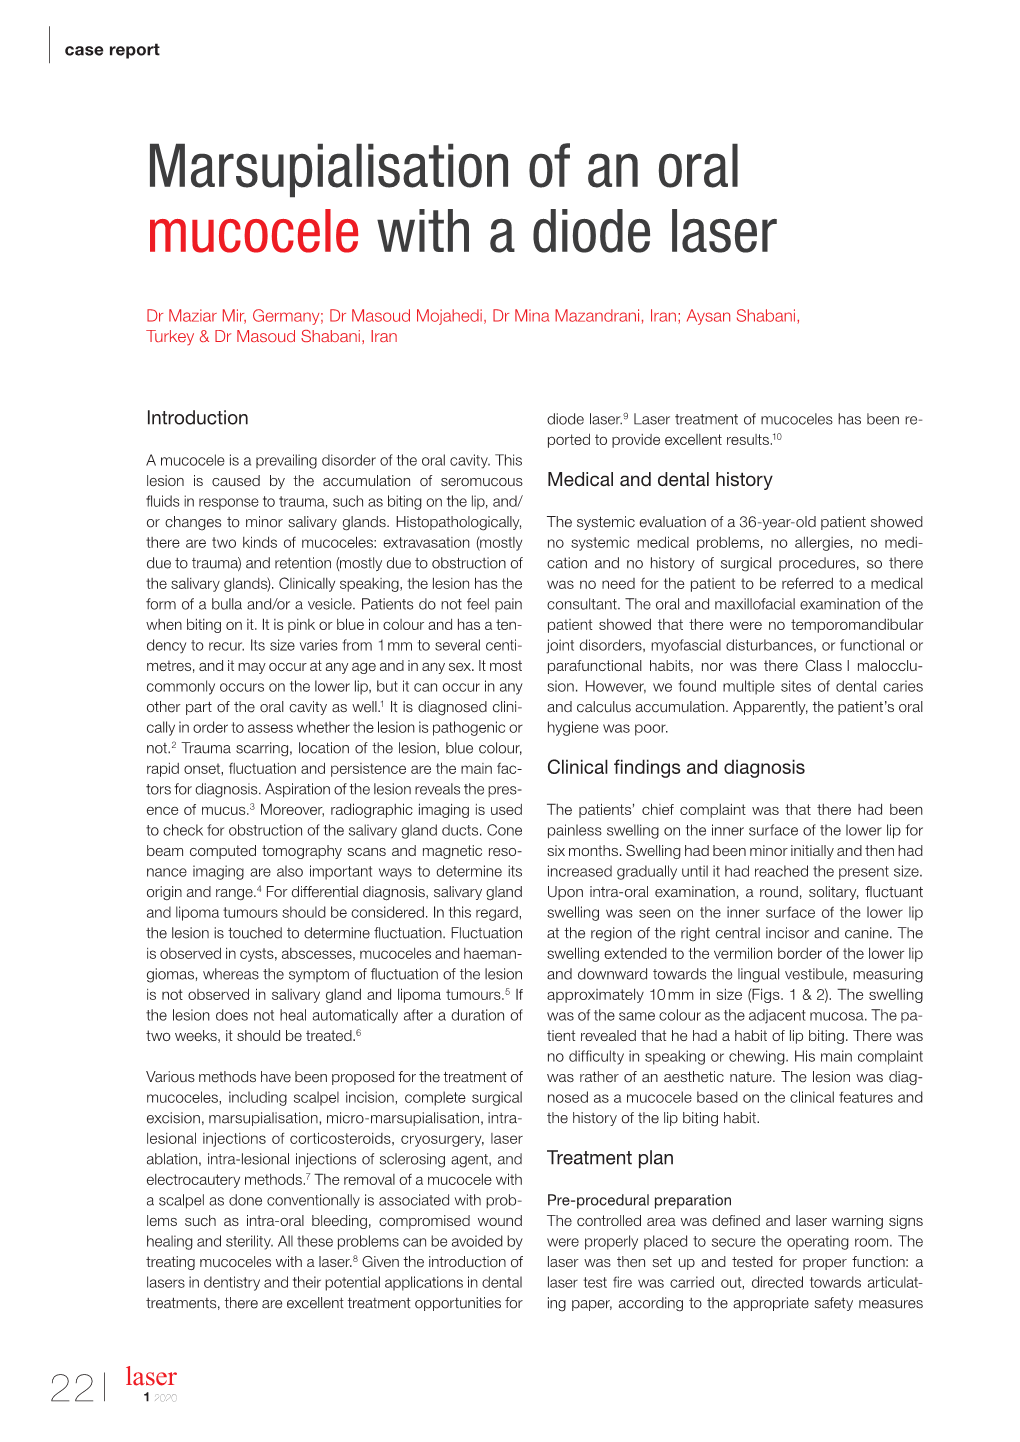 Marsupialisation of an Oral Mucocele with a Diode Laser